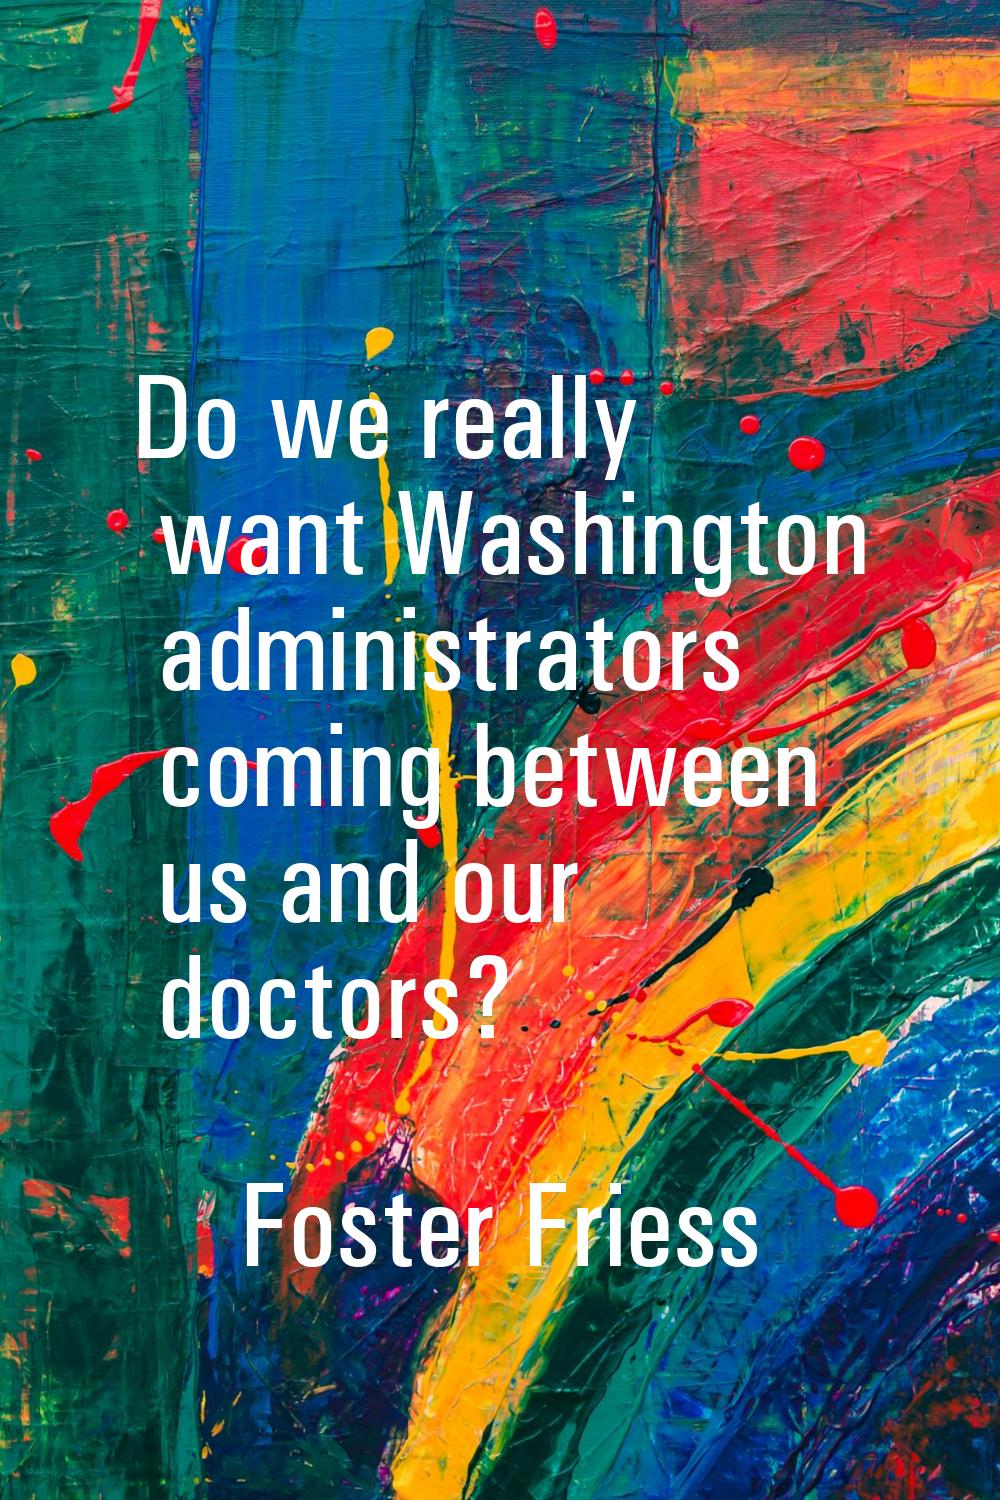 Do we really want Washington administrators coming between us and our doctors?